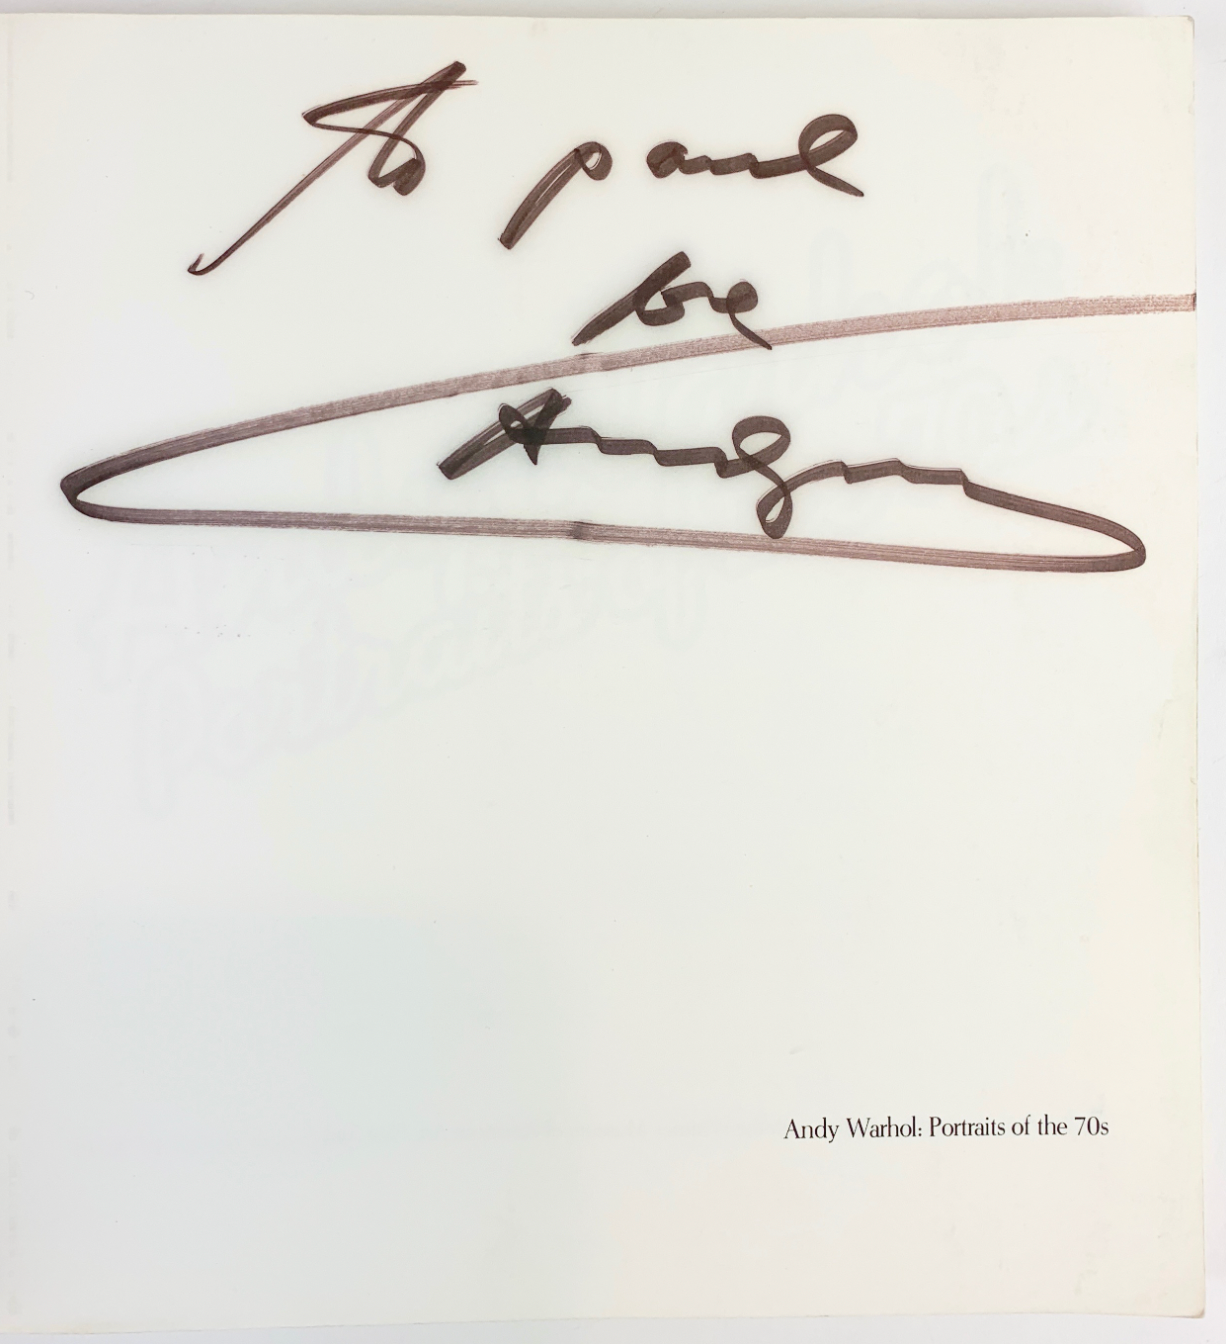 Warhol, Andy. (1928–1987) [Essay by Robert Rosenblum, Edited by David Whitney]: Andy Warhol, Portraits of the 70s - SIGNED AND WITH AN ORIGINAL SIGNED POLAROID